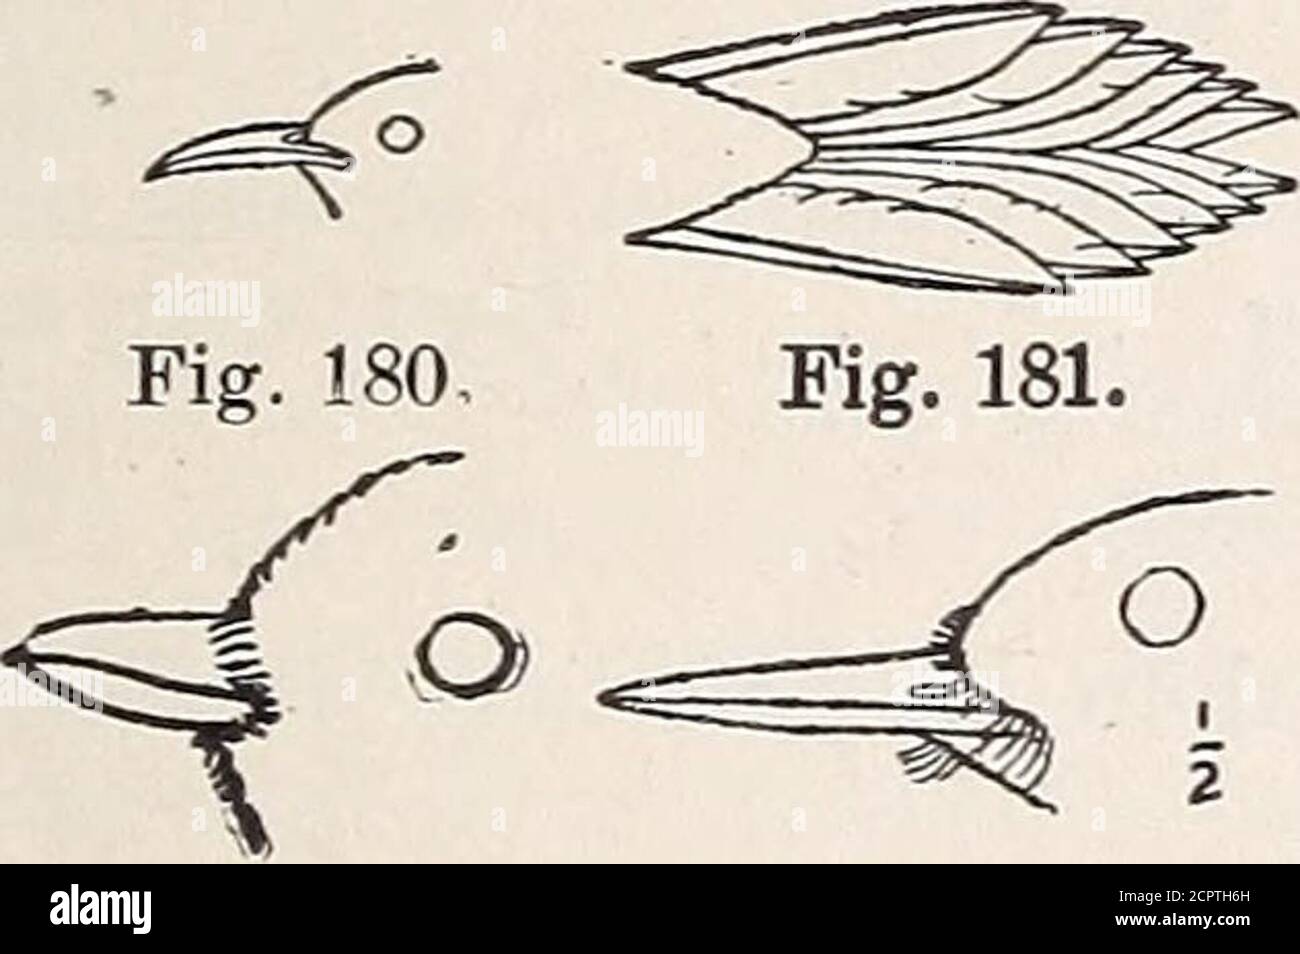 . Handbook of birds of the western United States including the great plains, great basin, Pacific slope, and lower Rio Grande valley . ORDER GALLING: GALLINACEOUS BIRDS. (Families Tetraonid^, Phasianid^, and Cracid.e.) FAMILY TETRAONIDiE: GROUSE, PARTRIDGES.QUAILS, ETC. KEY TO GENERA. 1. Legs feathered down to hase of toes. • 2. Tail feathers narrow and pointed. Centrocercus, p. 133. 2. Tail feathers broad and rounded.3. Sides of neck with tuft of feathers. Tympanuchus, p. 129. Stock Photo